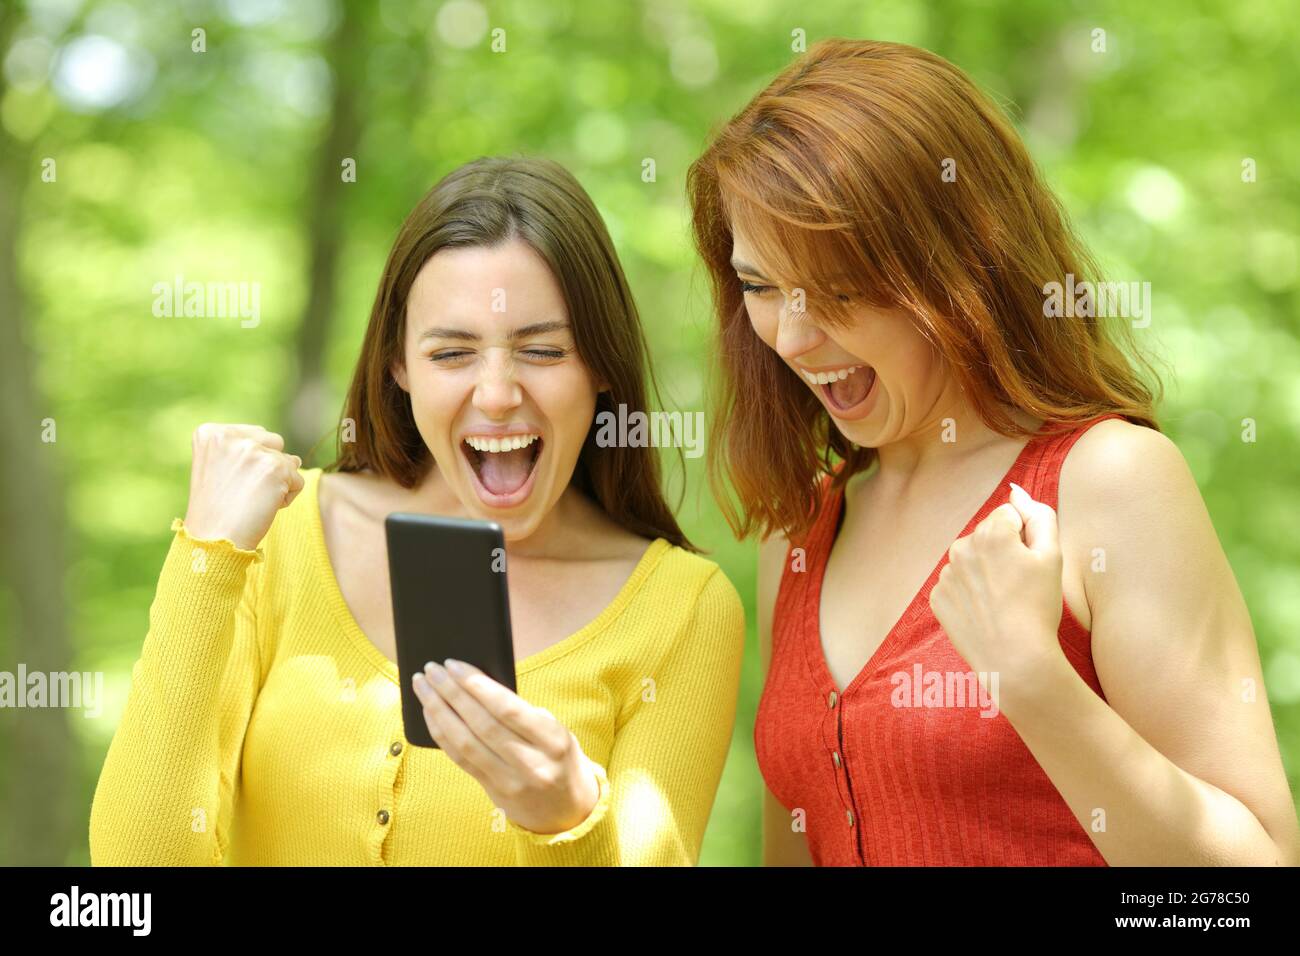 Two excited women checking smart phone content in a green park or forest Stock Photo